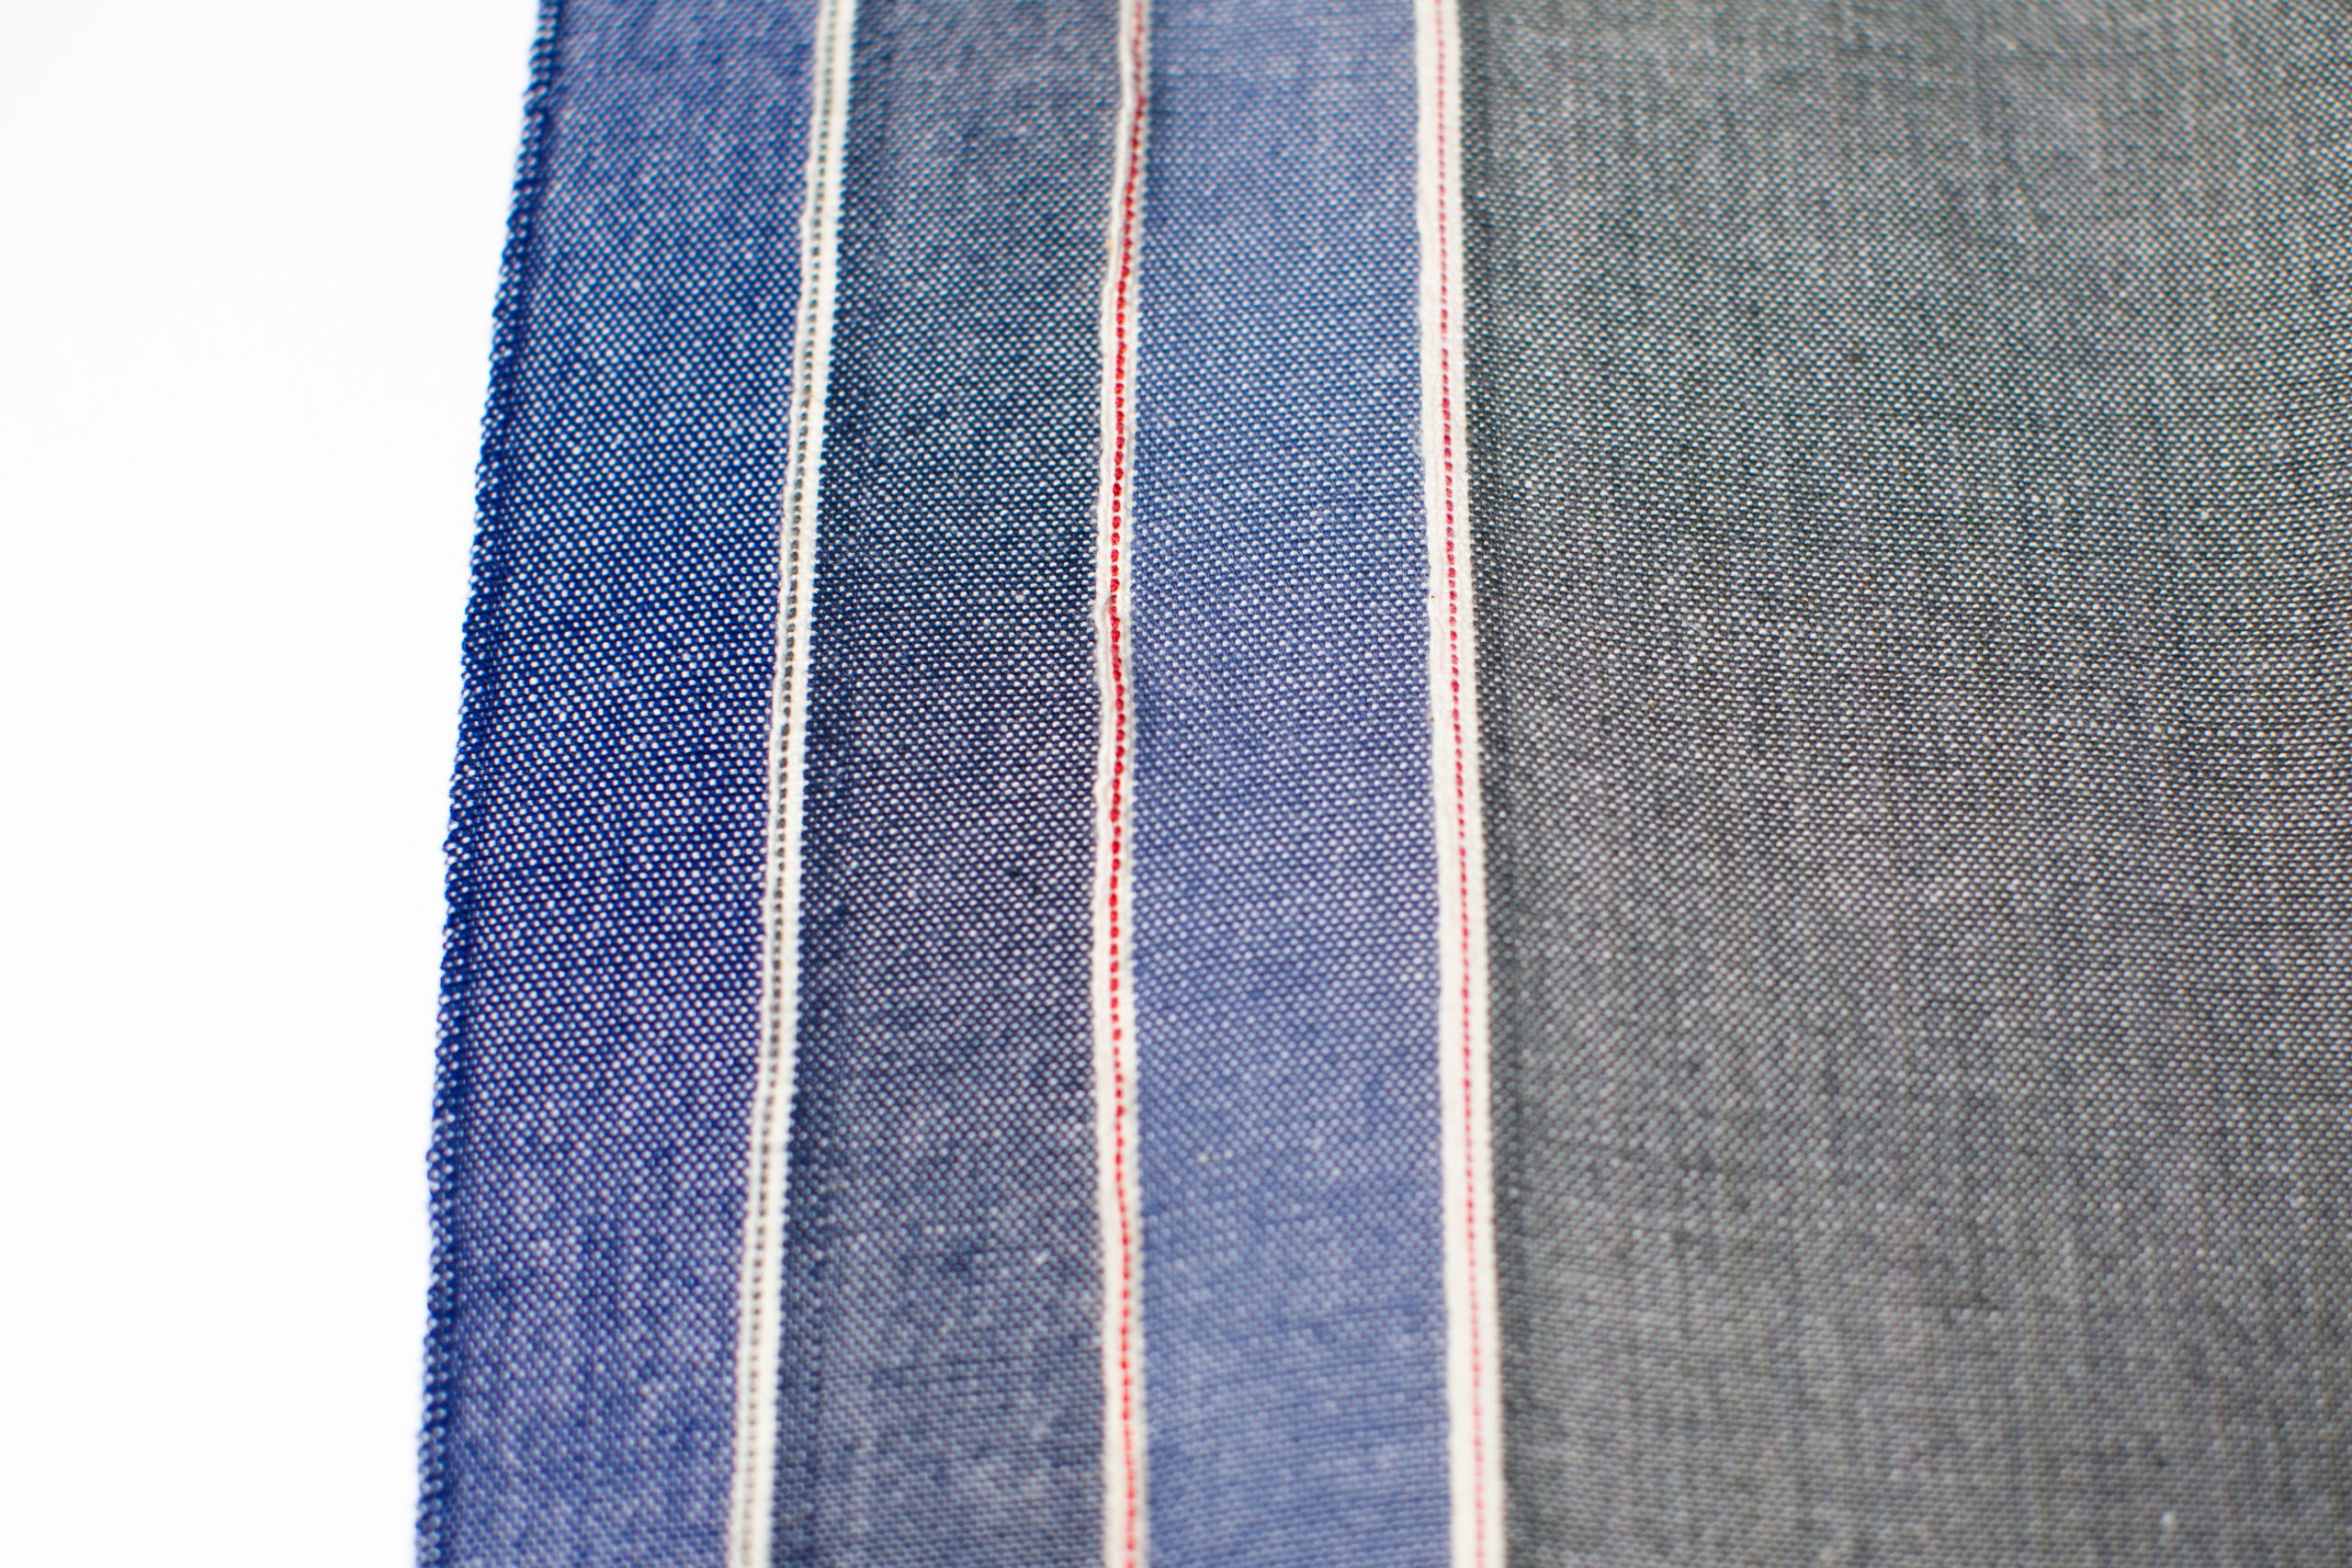 overhead-photograph-of-four-overlapping-blue-and-black-selvedge-textiles-with-detail-selvedge-id